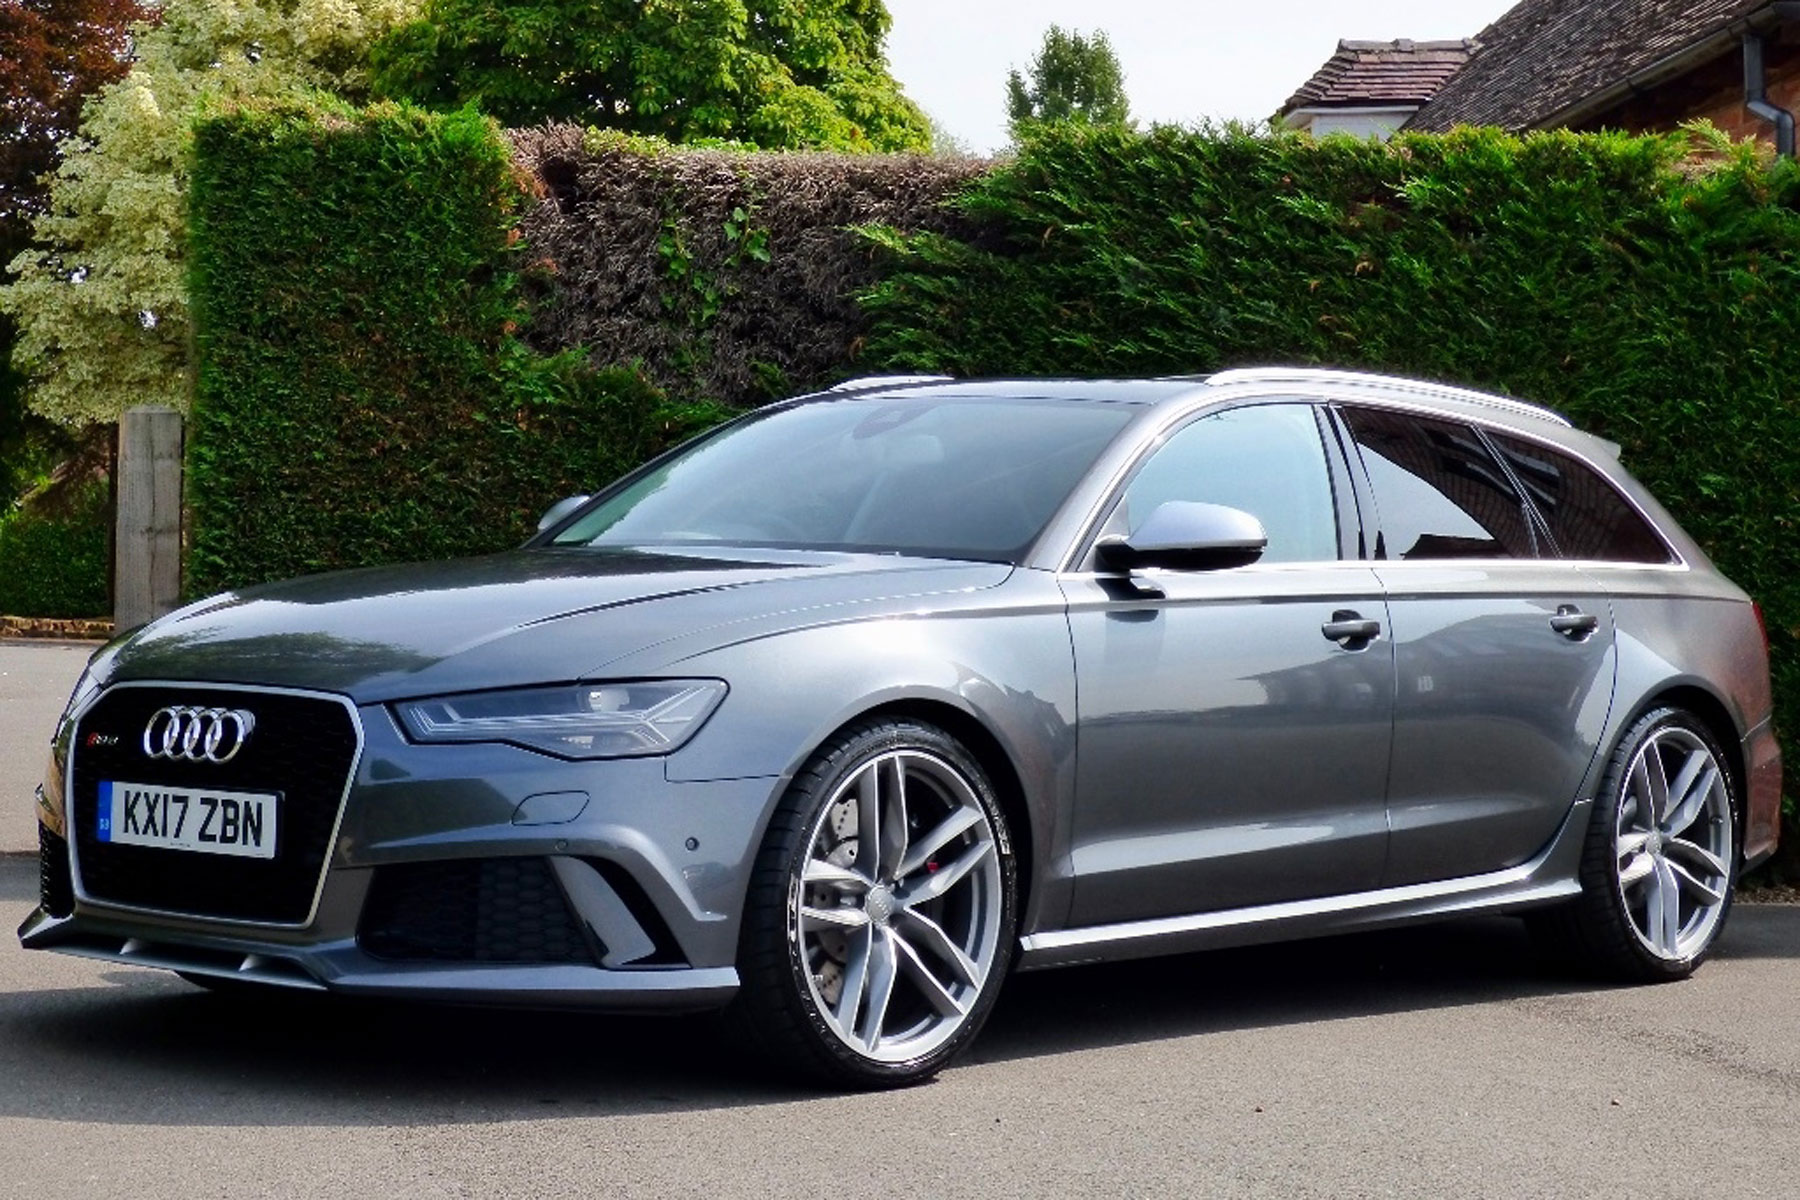 Prince Harrys Audi RS6 Avant for sale on Auto Trader  Motoring Research